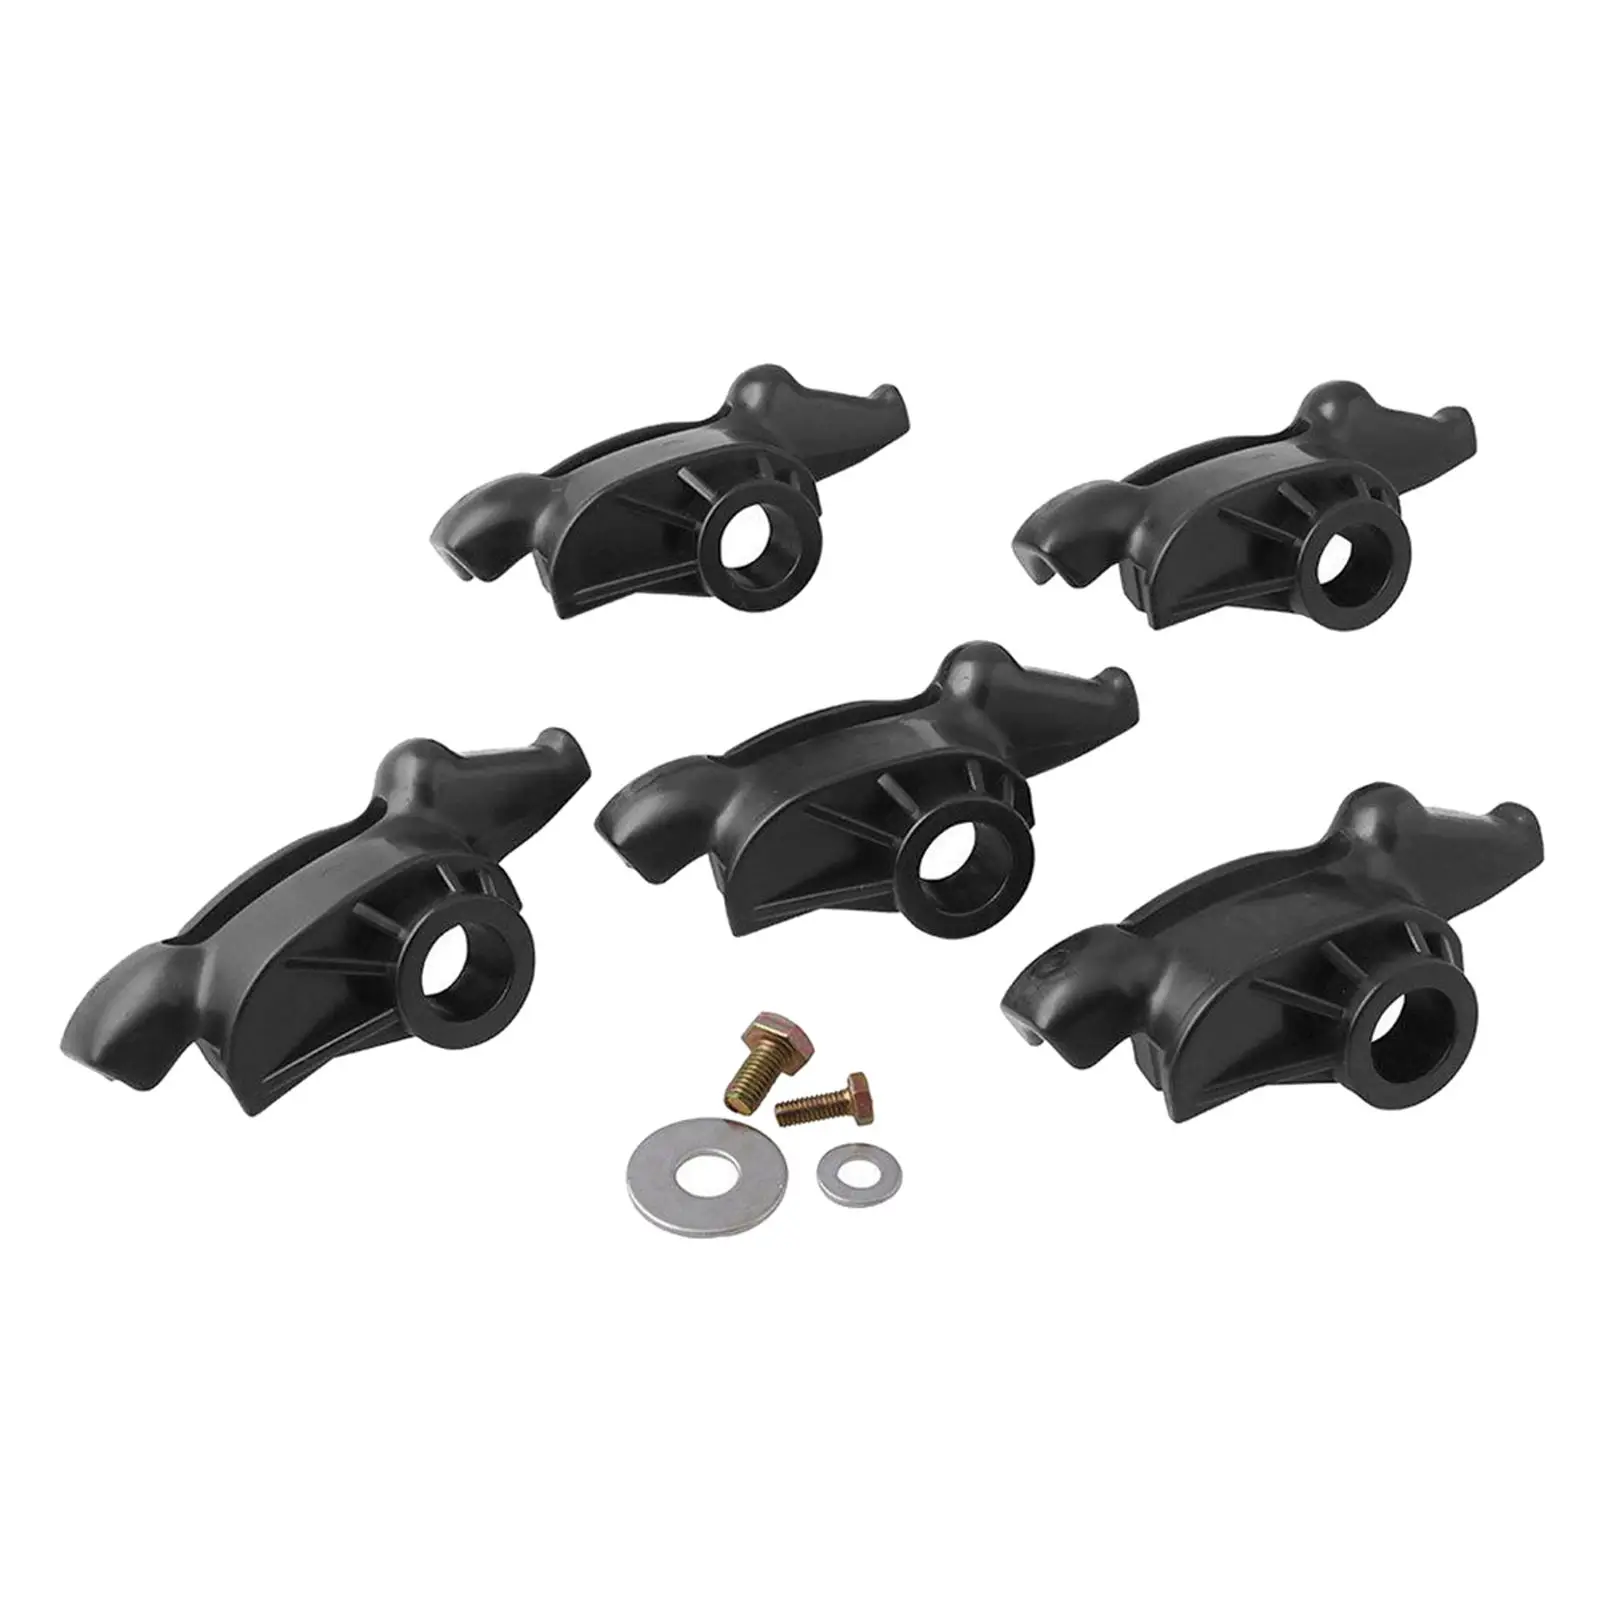 

Nylon Mount/Demount Head Kit with Tapered Hole for Coats Tire Changers, Easy Installation